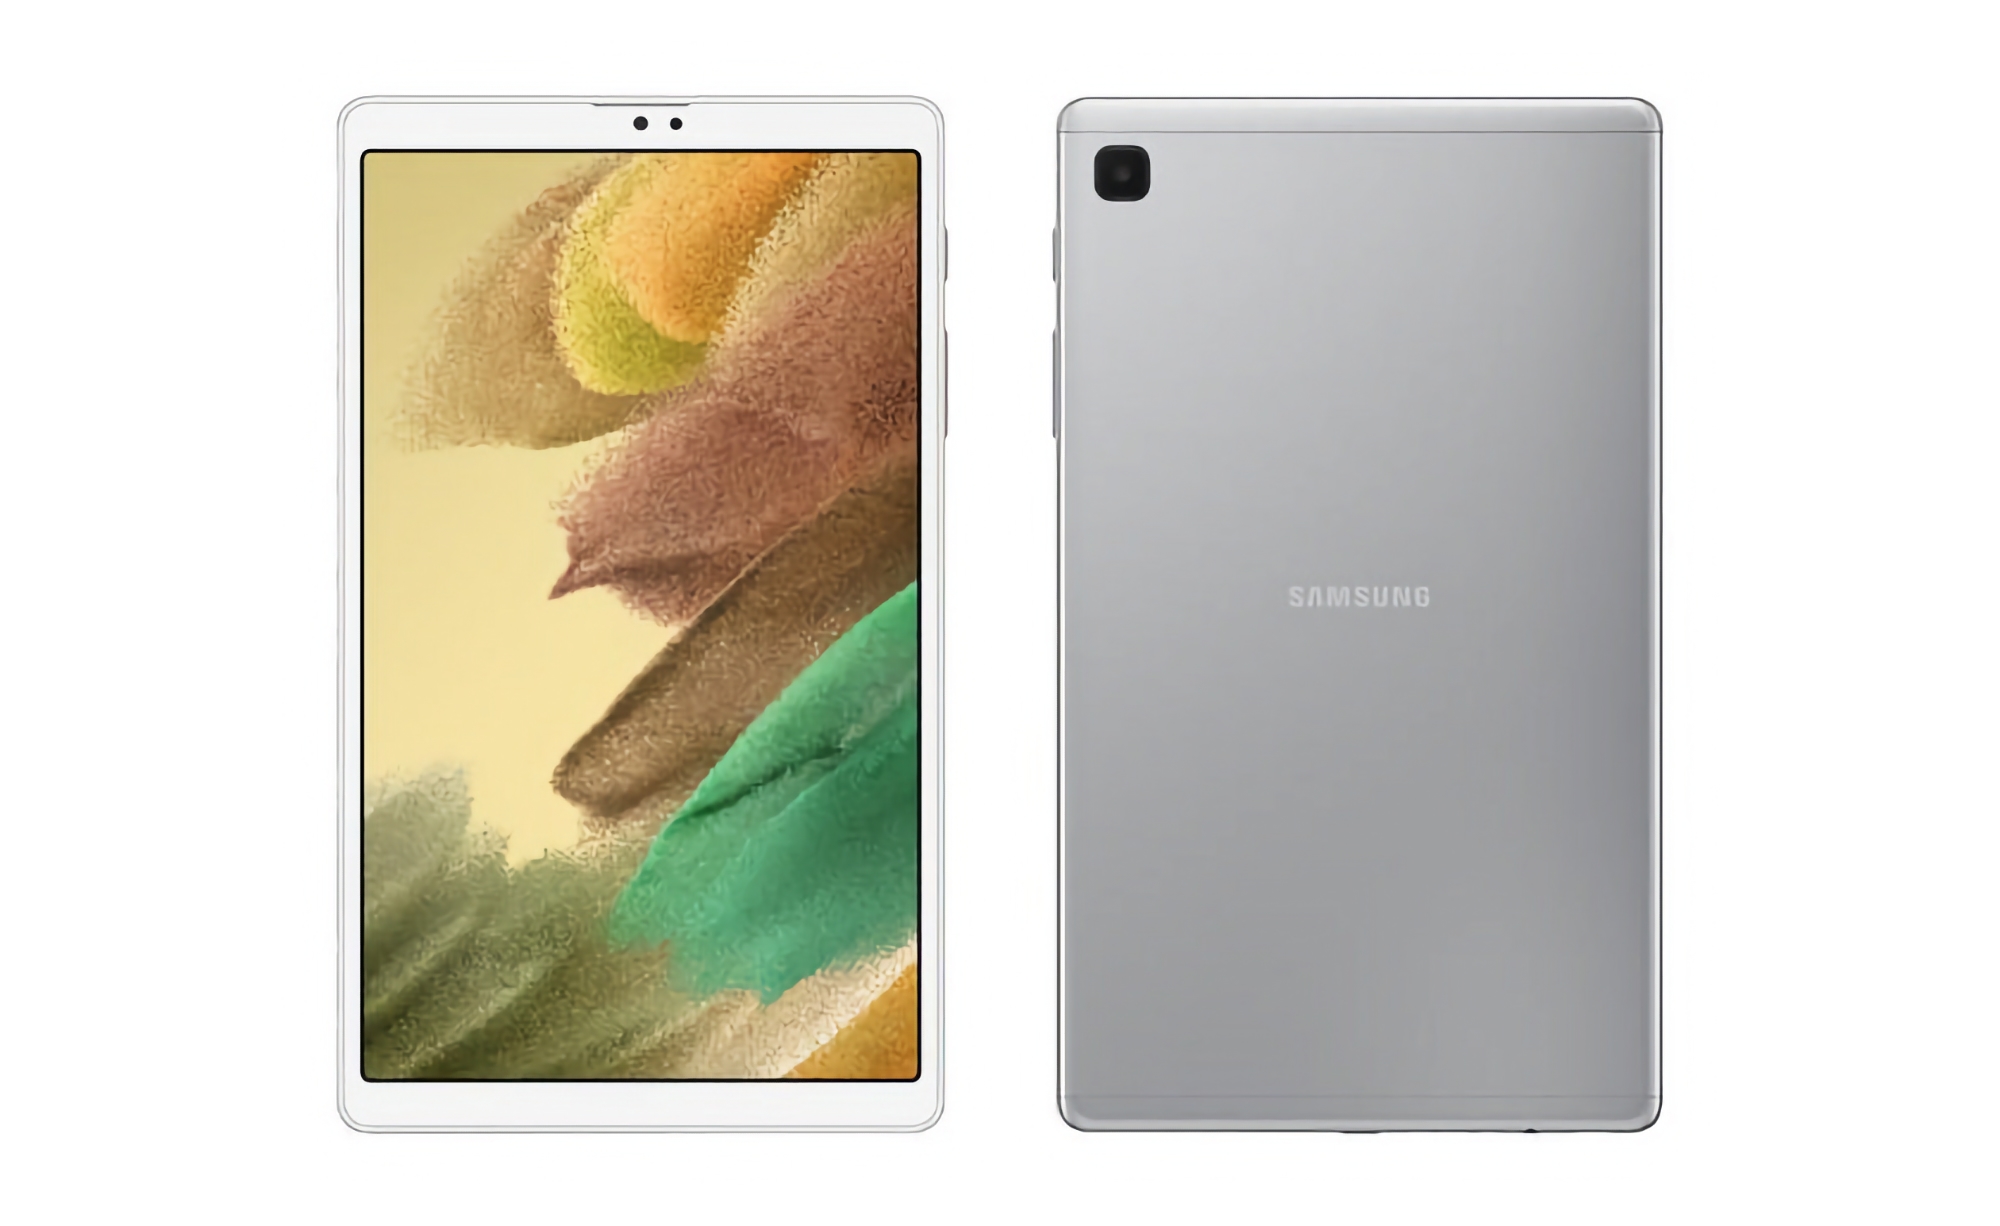 Samsung Galaxy Tab A7 Lite c LTE can be bought on Amazon with a discount of $30